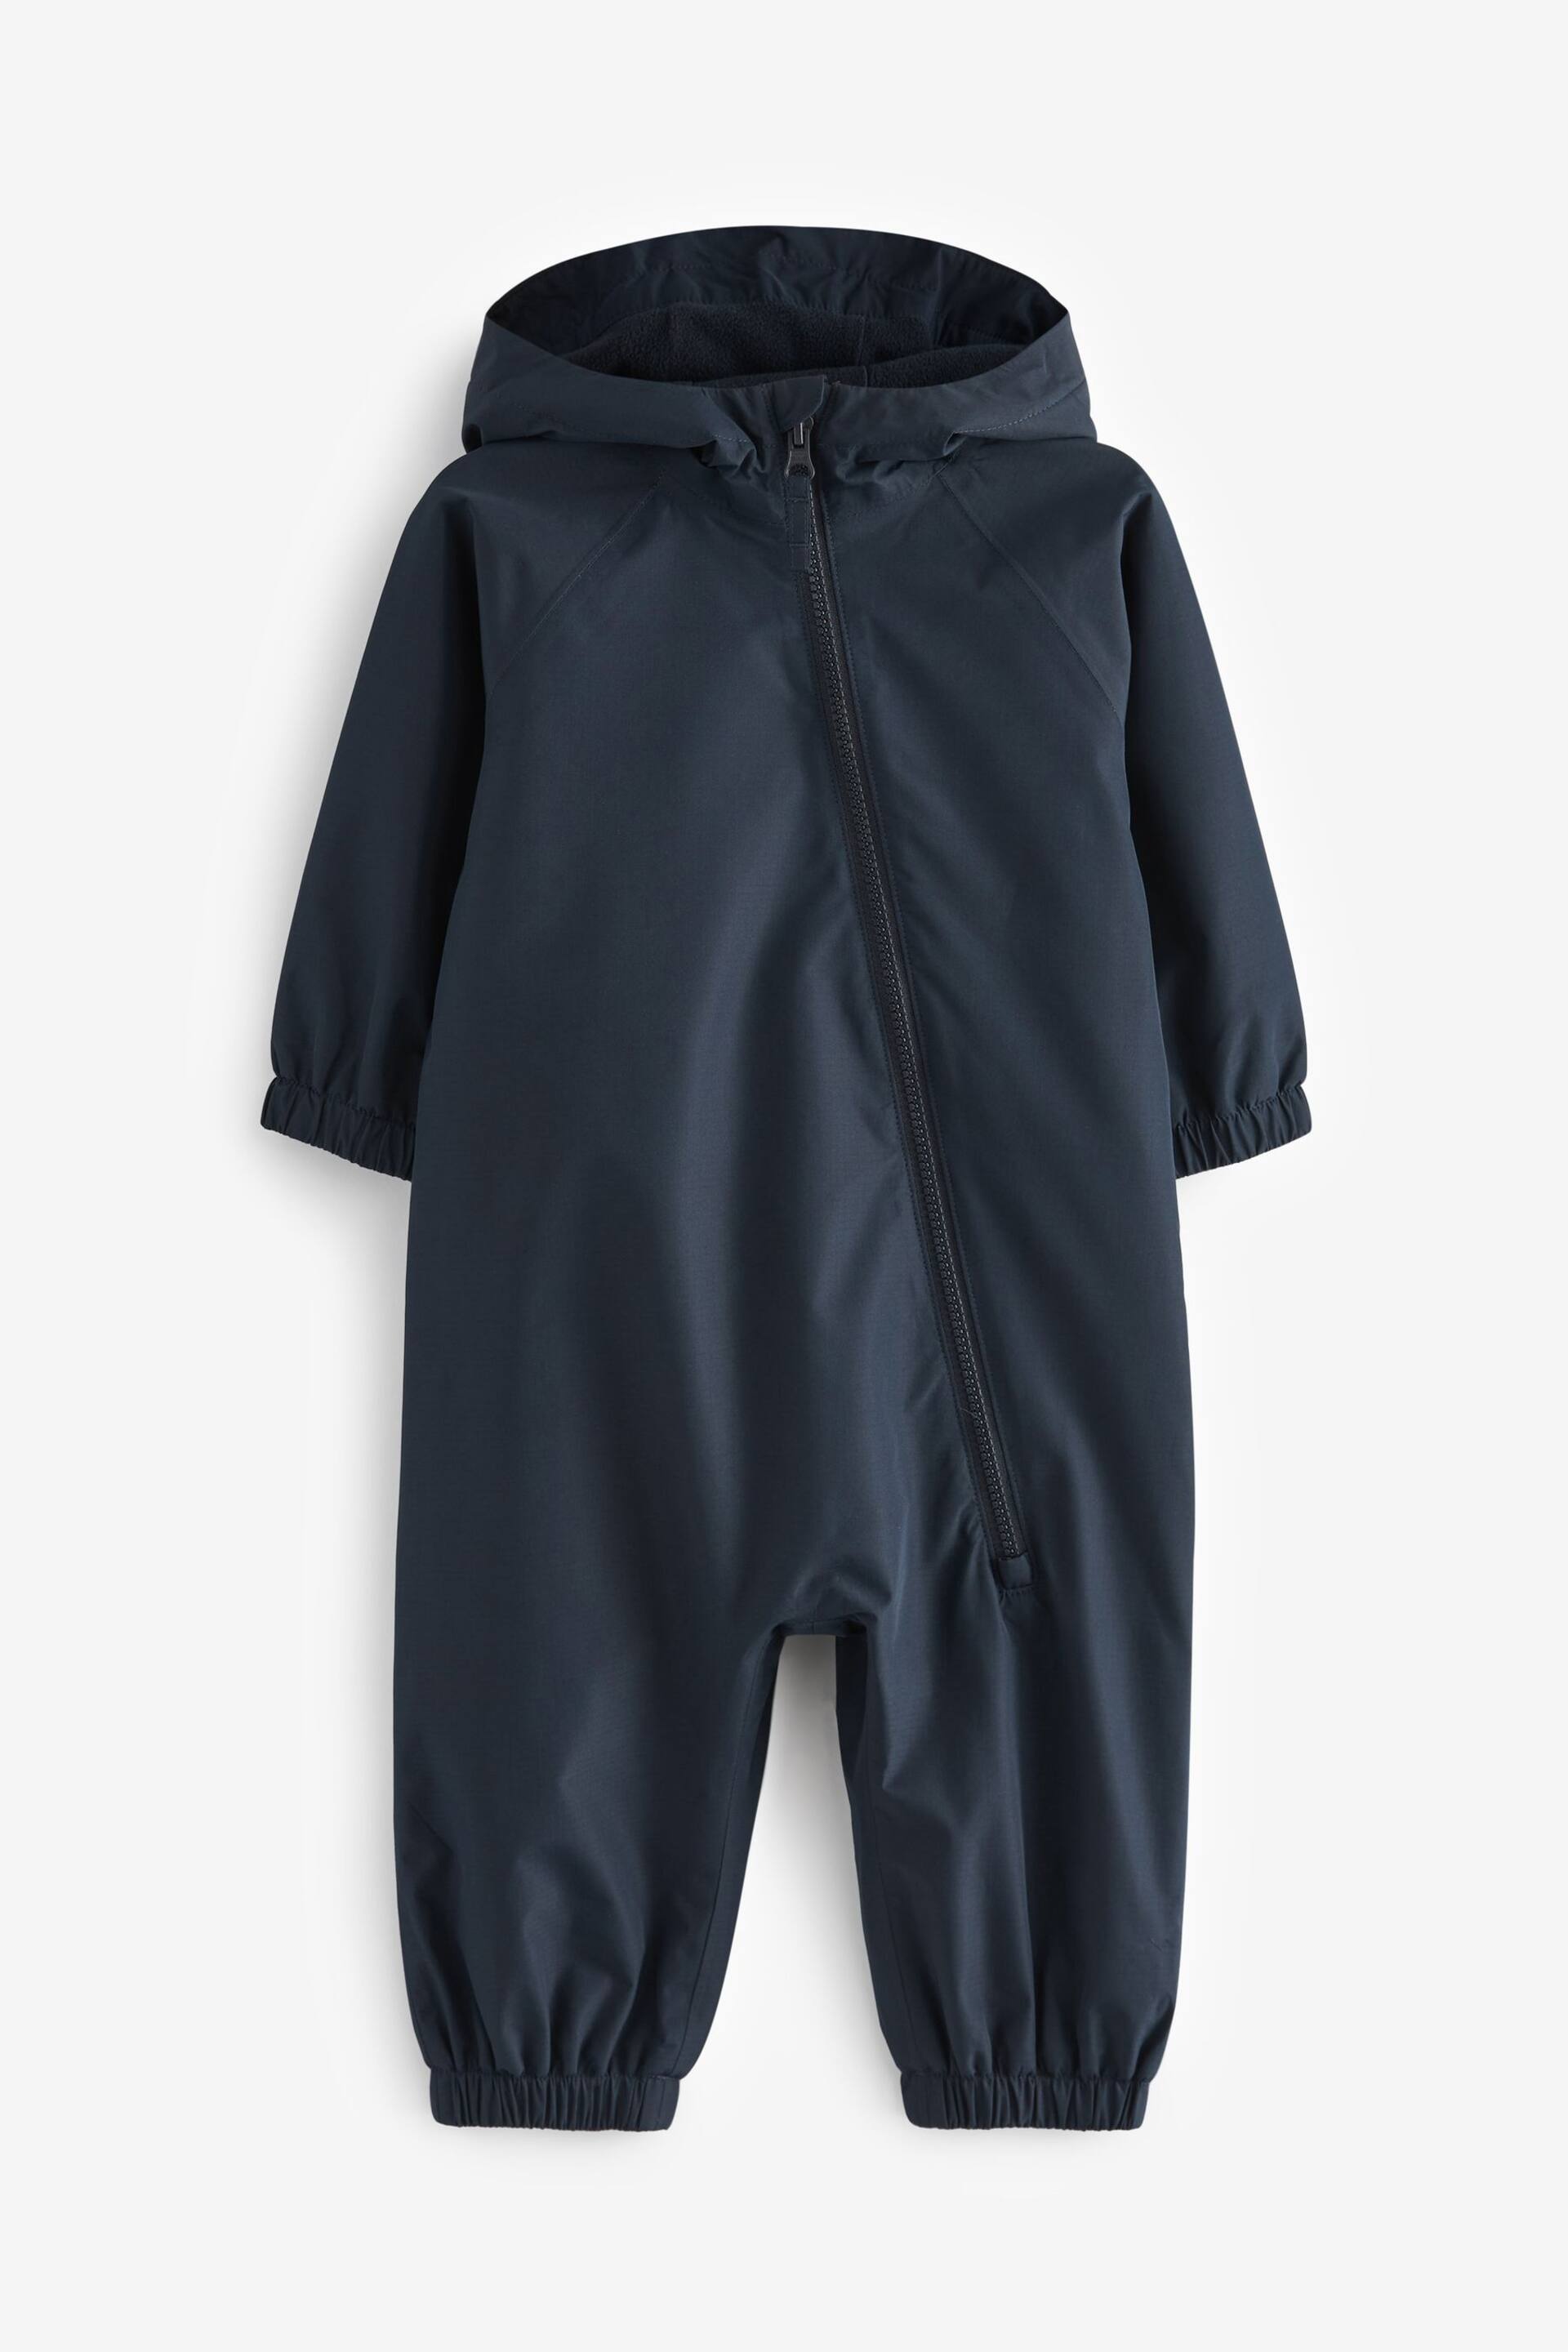 Navy Blue Waterproof Fleece Lined Puddlesuit (3mths-7yrs) - Image 4 of 10